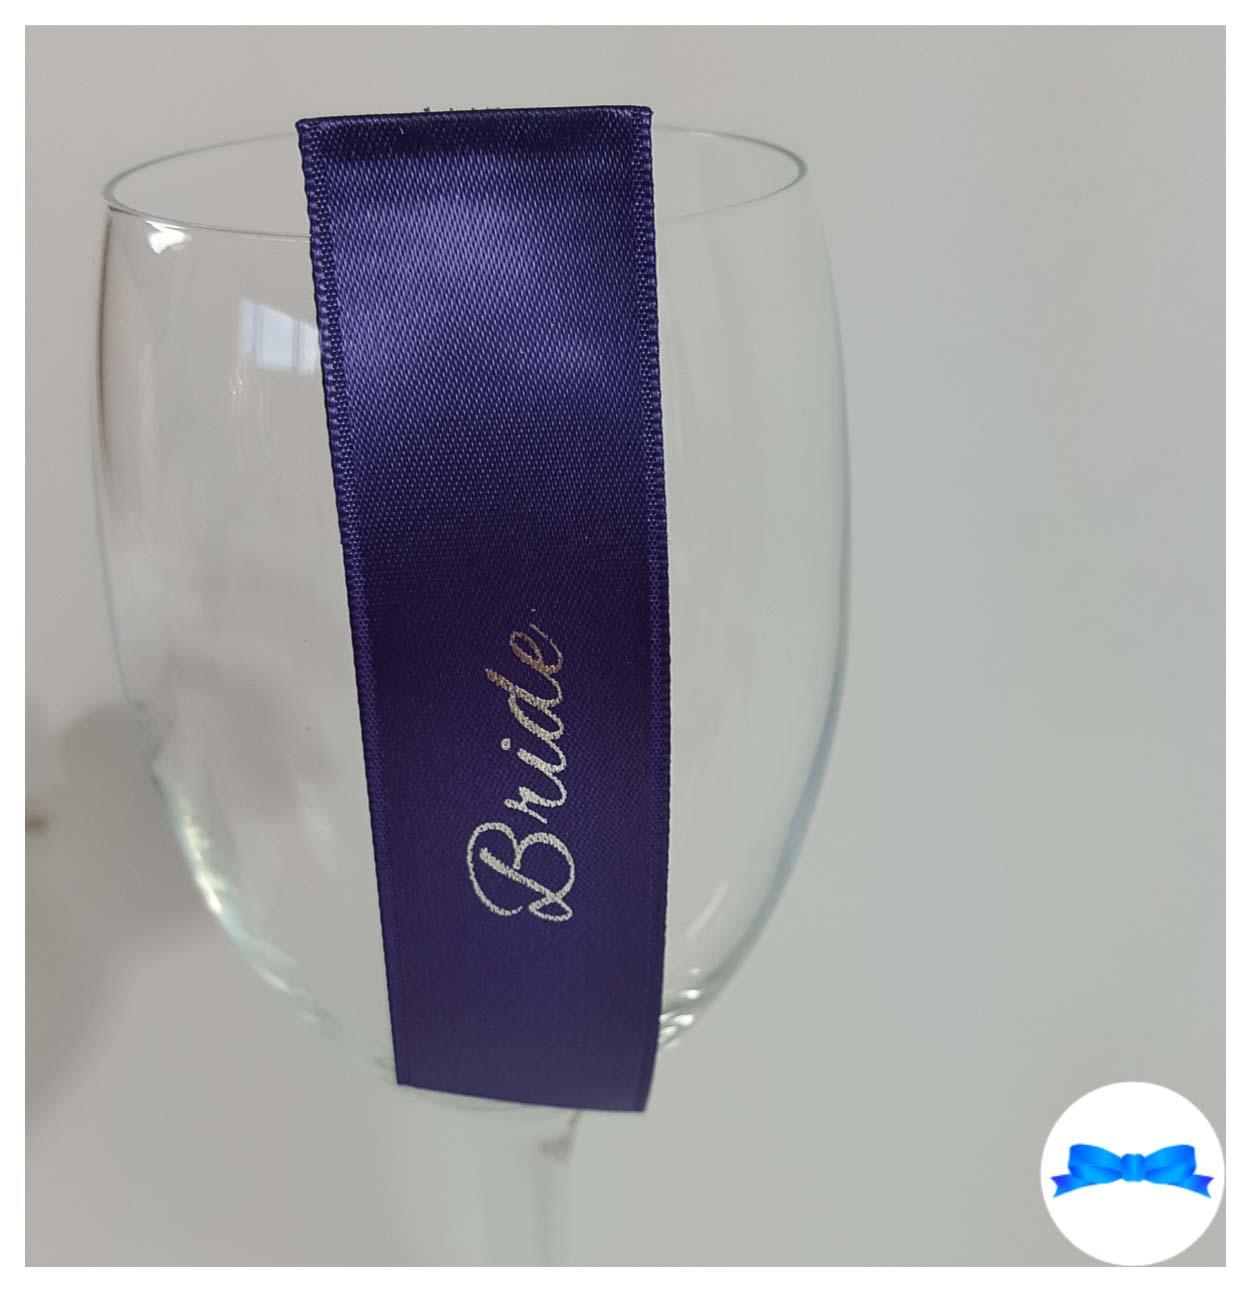 Guest name wine glass ribbons purple and silver